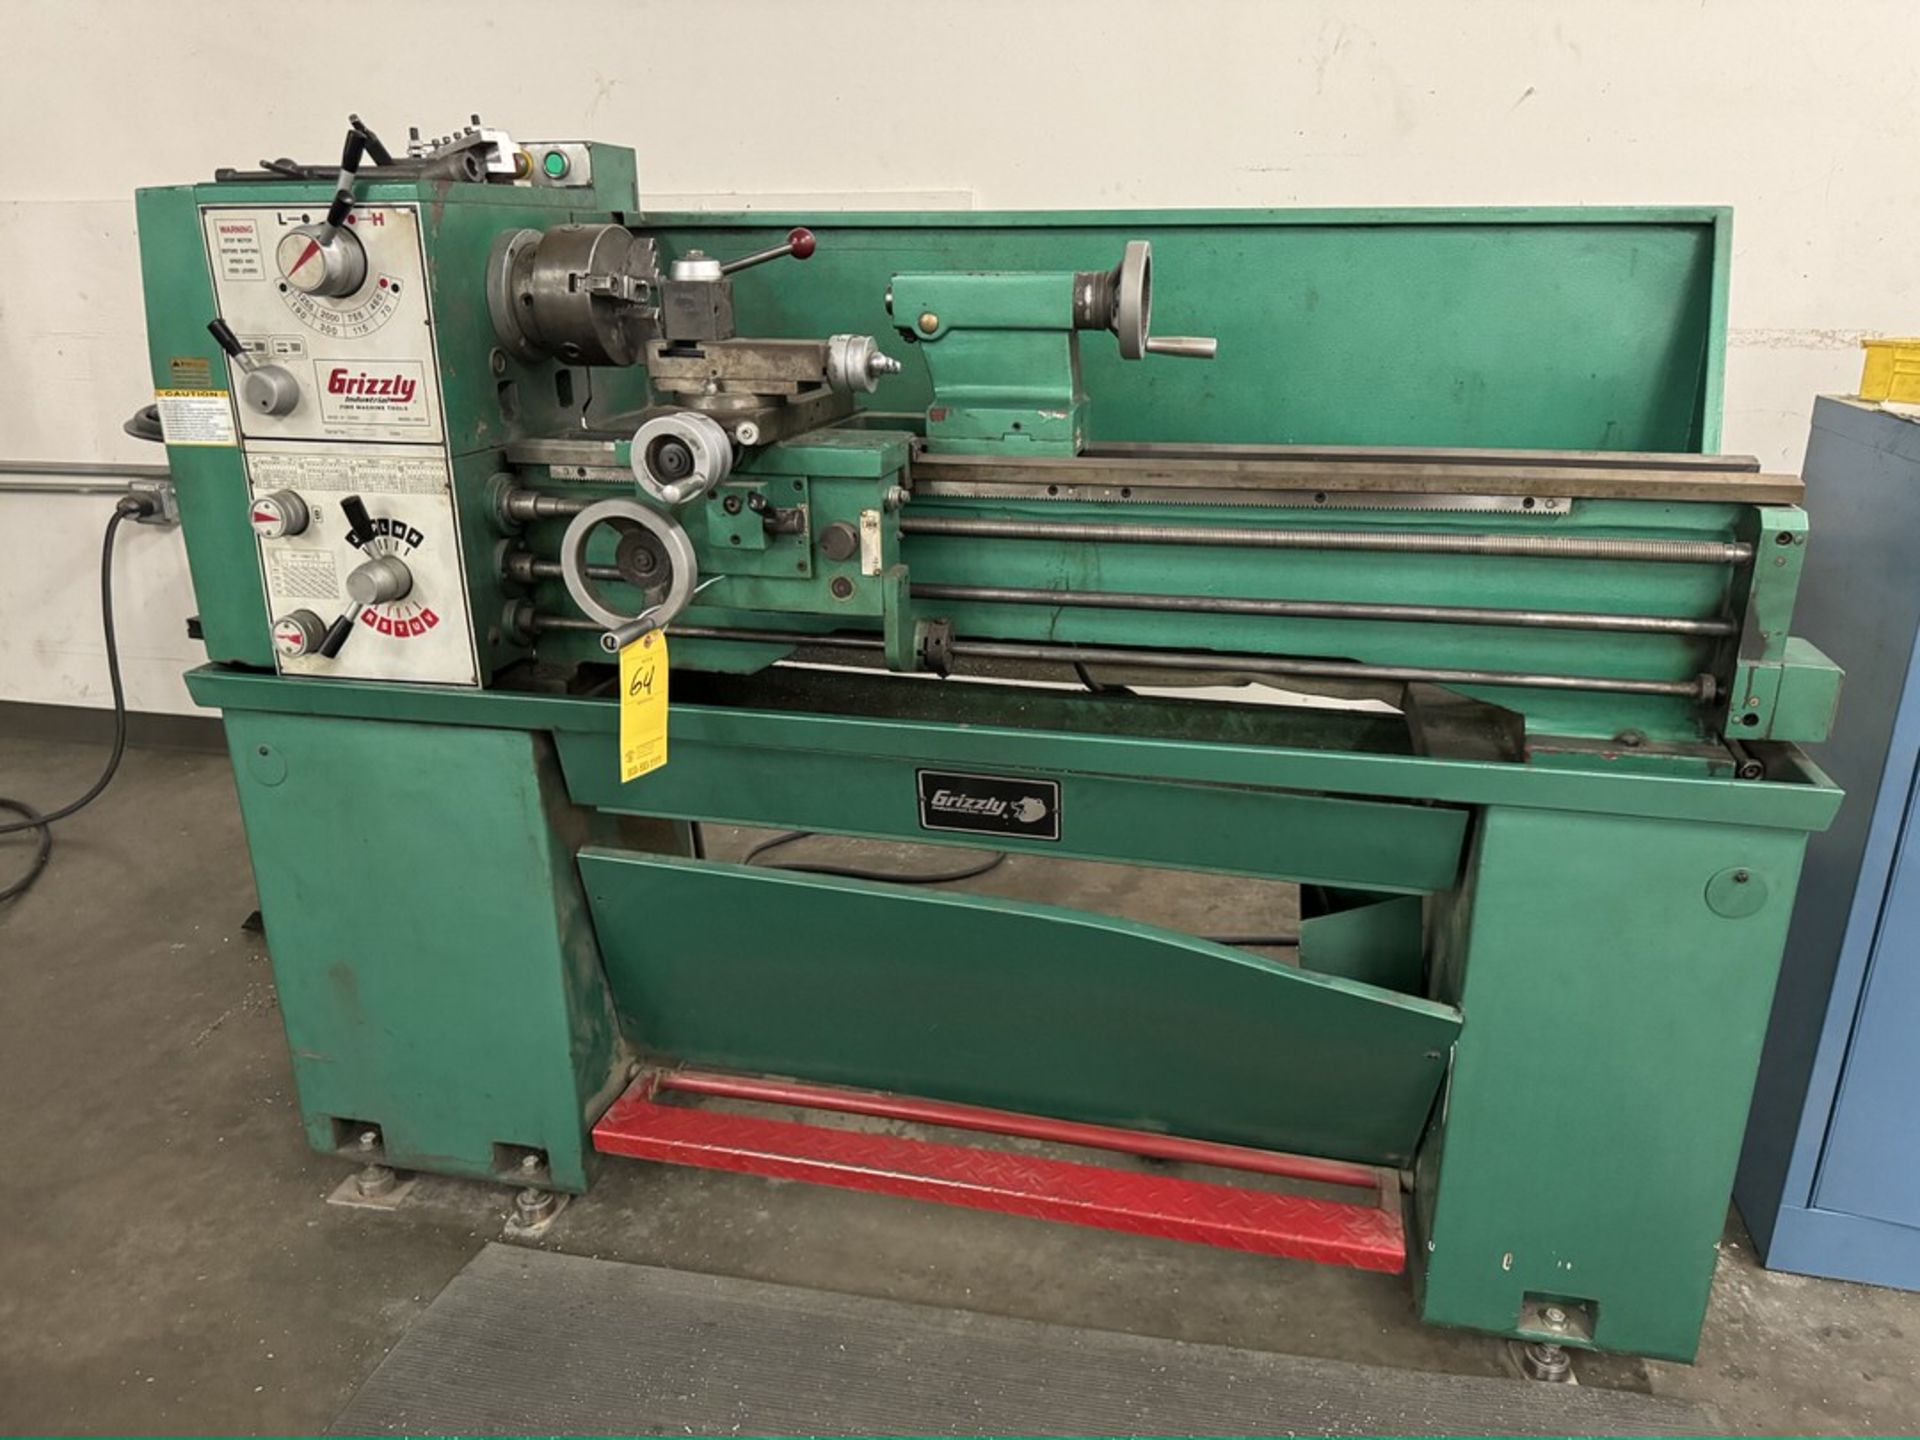 Grizzly Industrial Lathe, Approx Swing: 12”, Approx 48” Centers